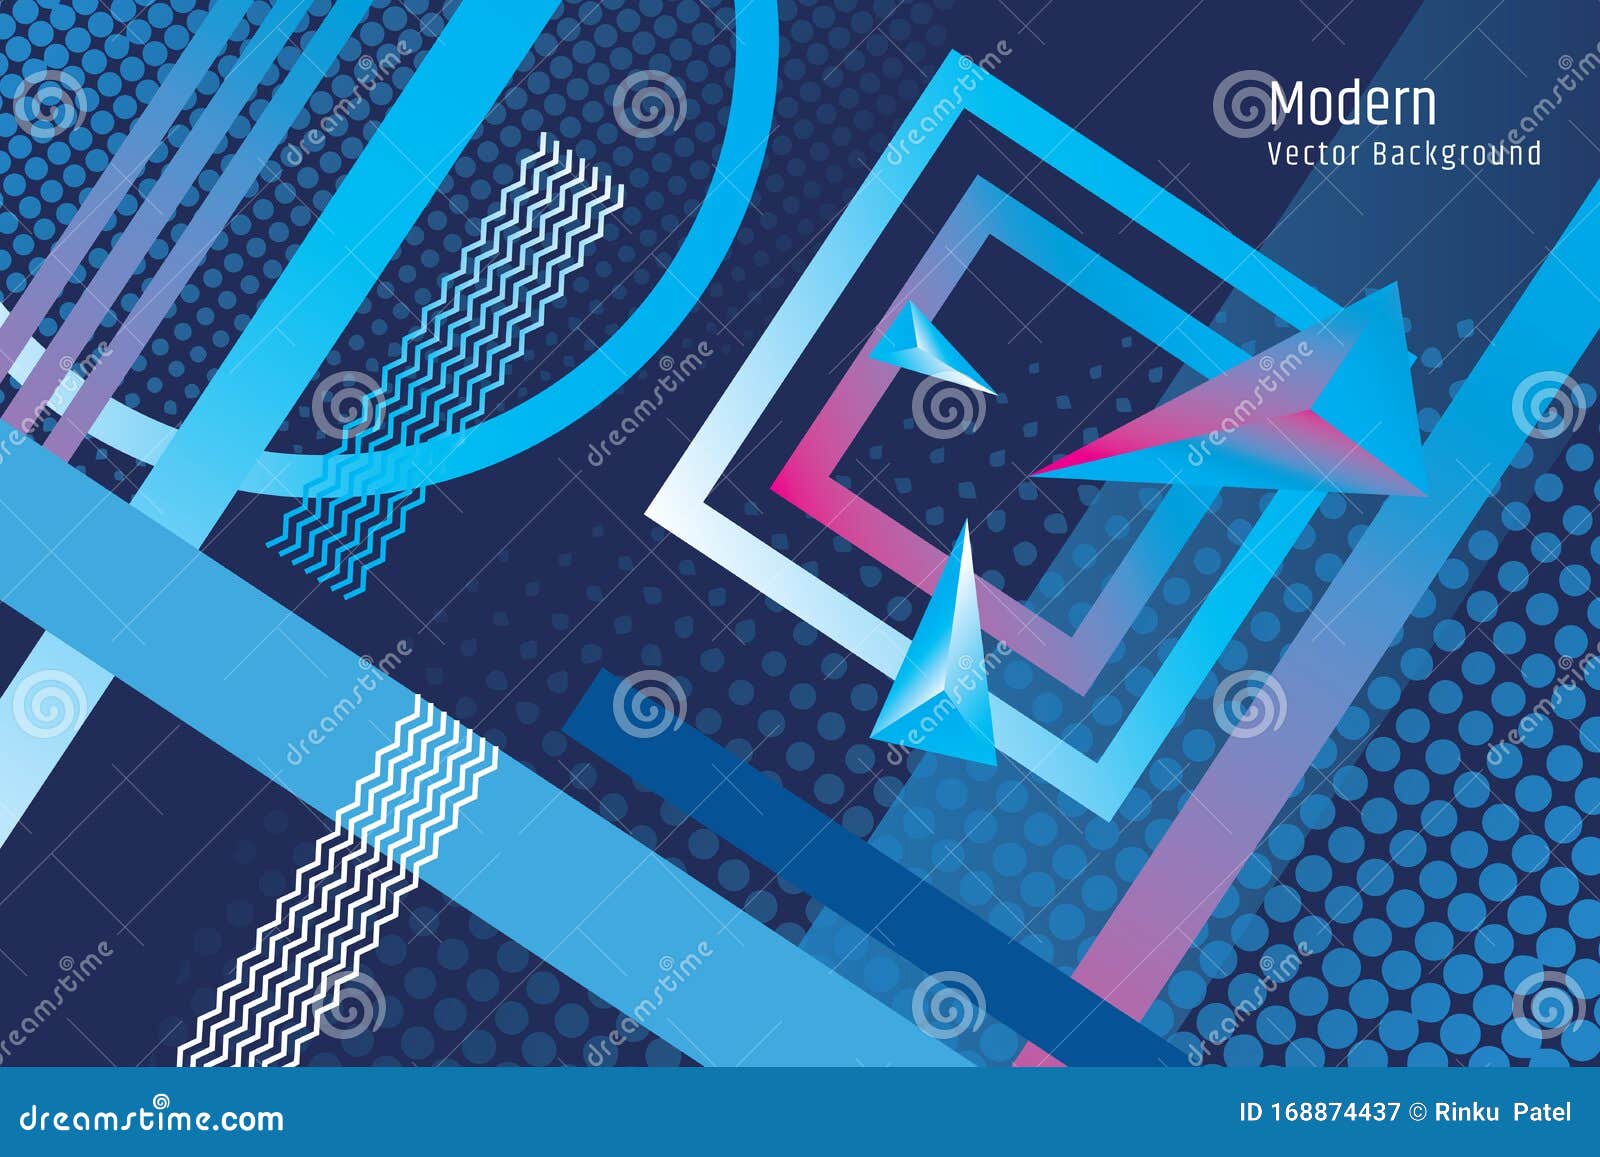 modern abstract background with blue color